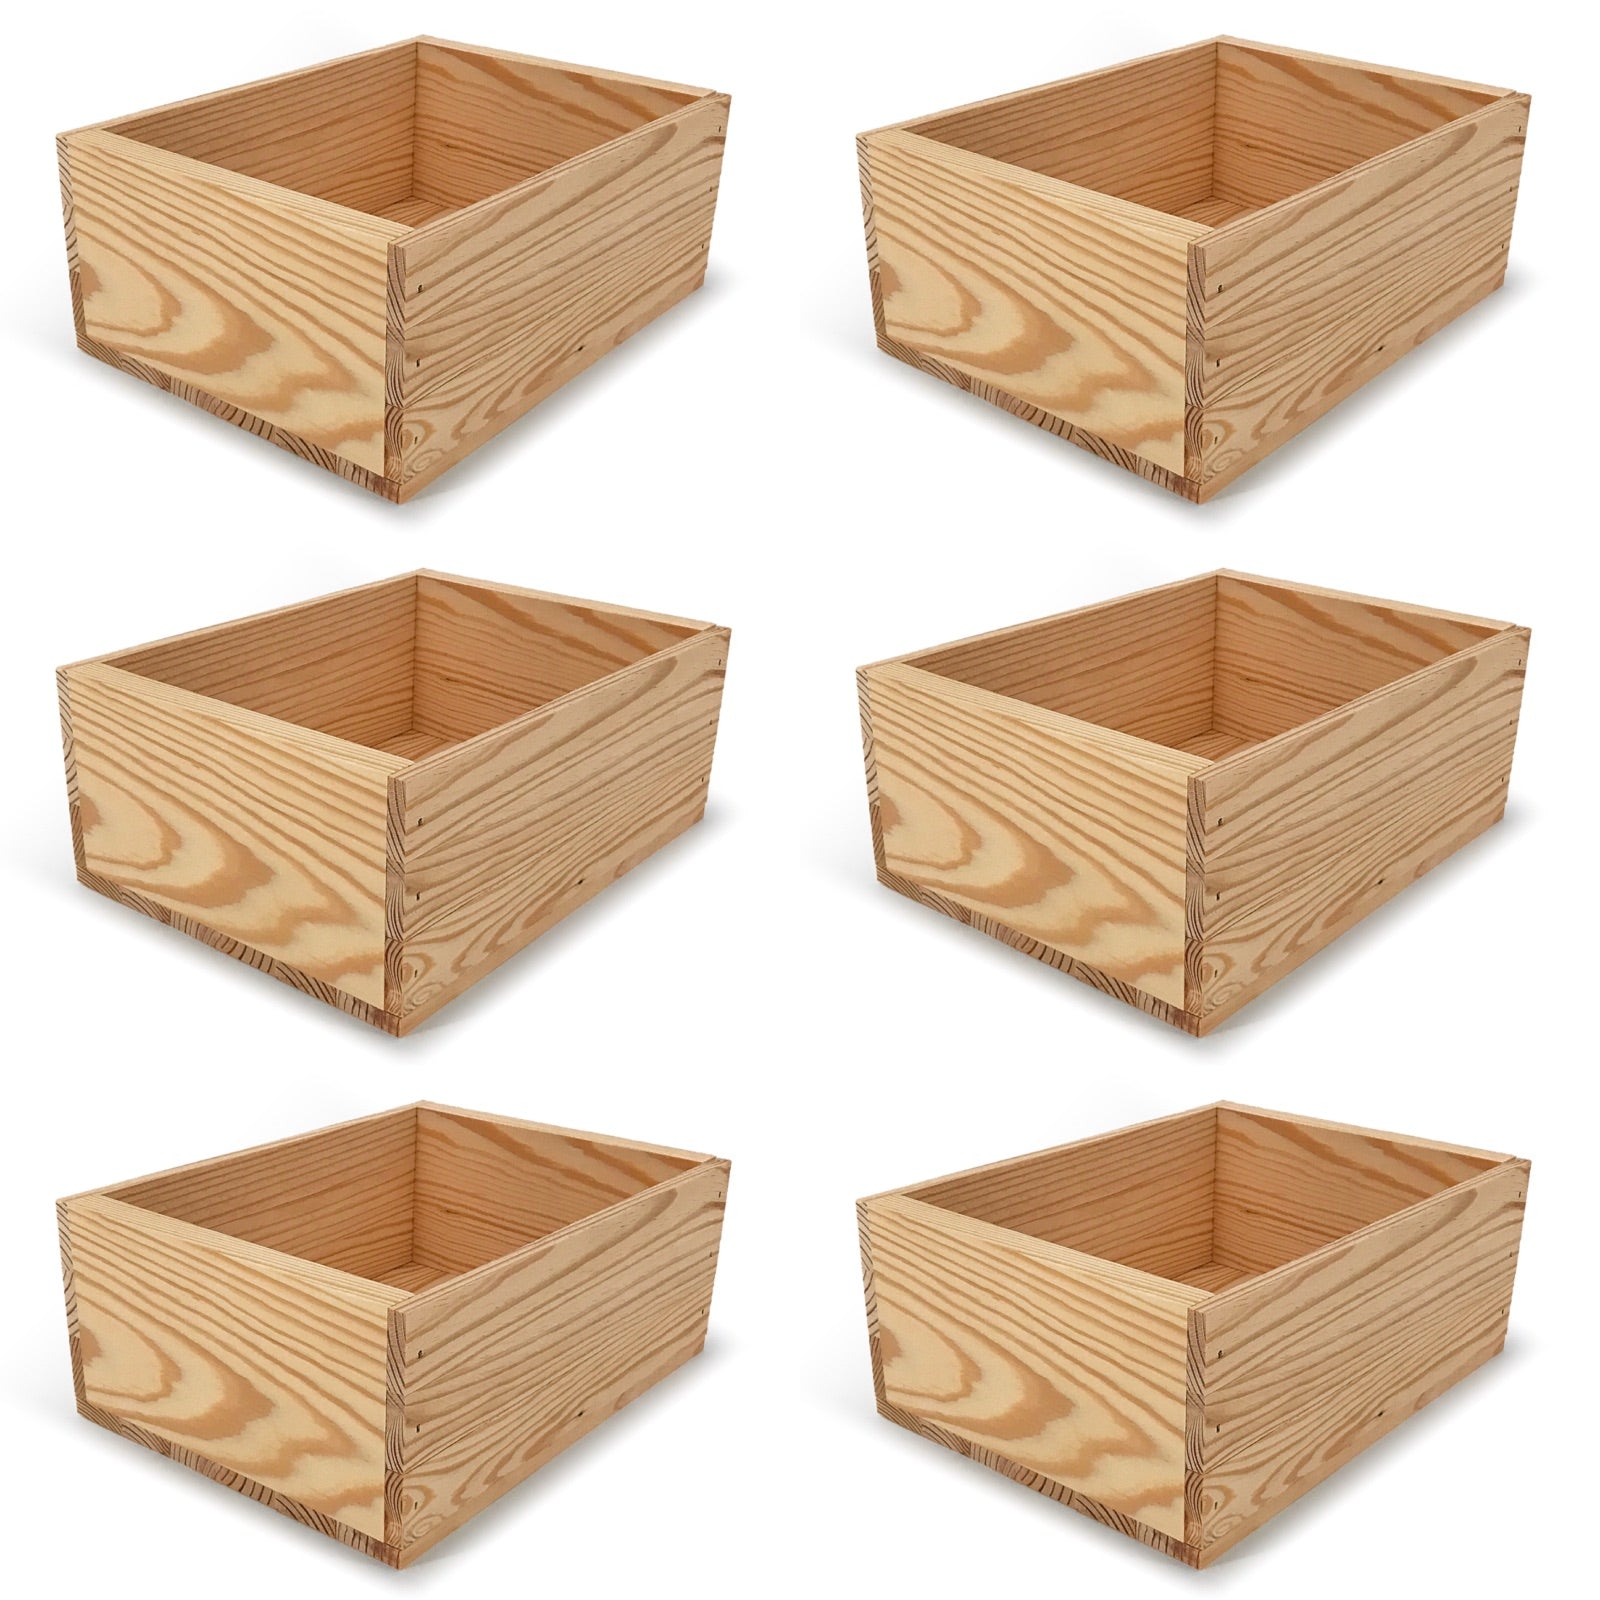 6 Small wooden crates 10x8x4.25